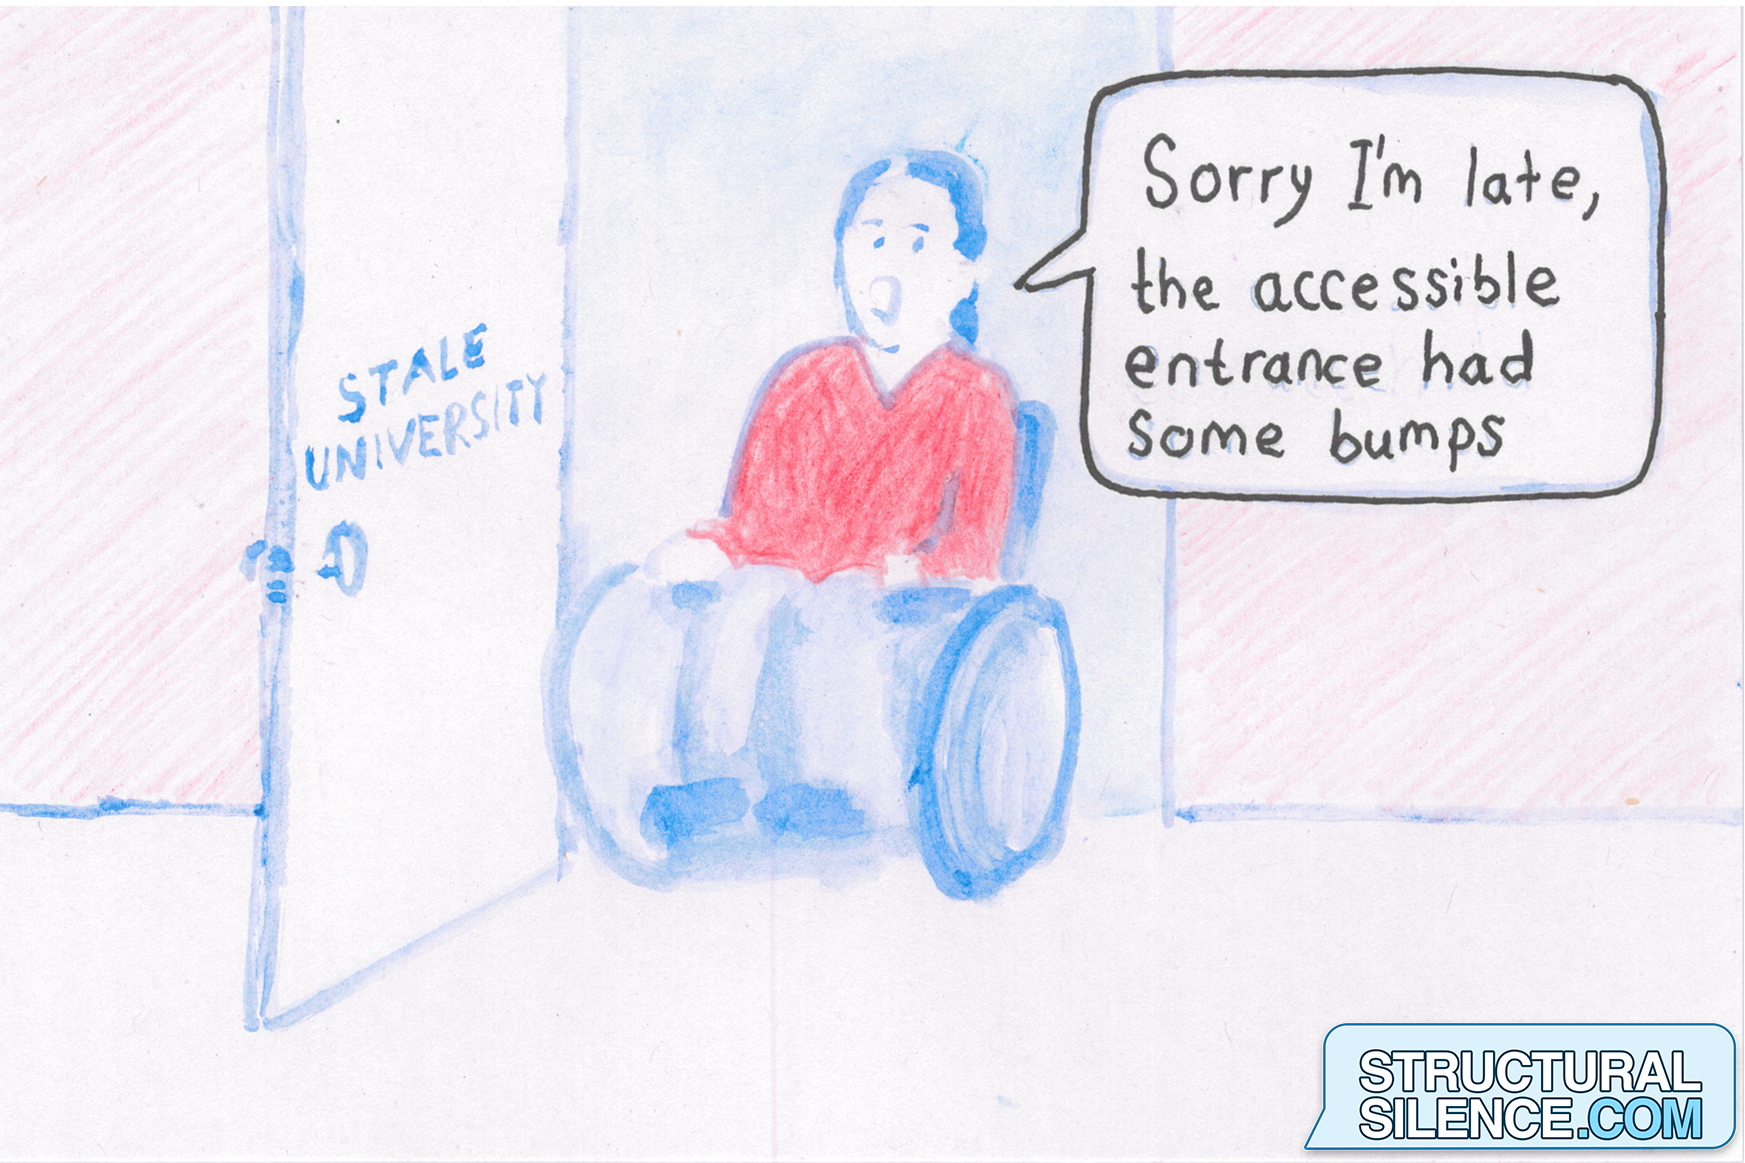 The viewpoint is from inside the classroom as the wheelchaired character enters through the door. The wheelchaired character says, "Sorry I'm late, the accessible entrance had some bumps."